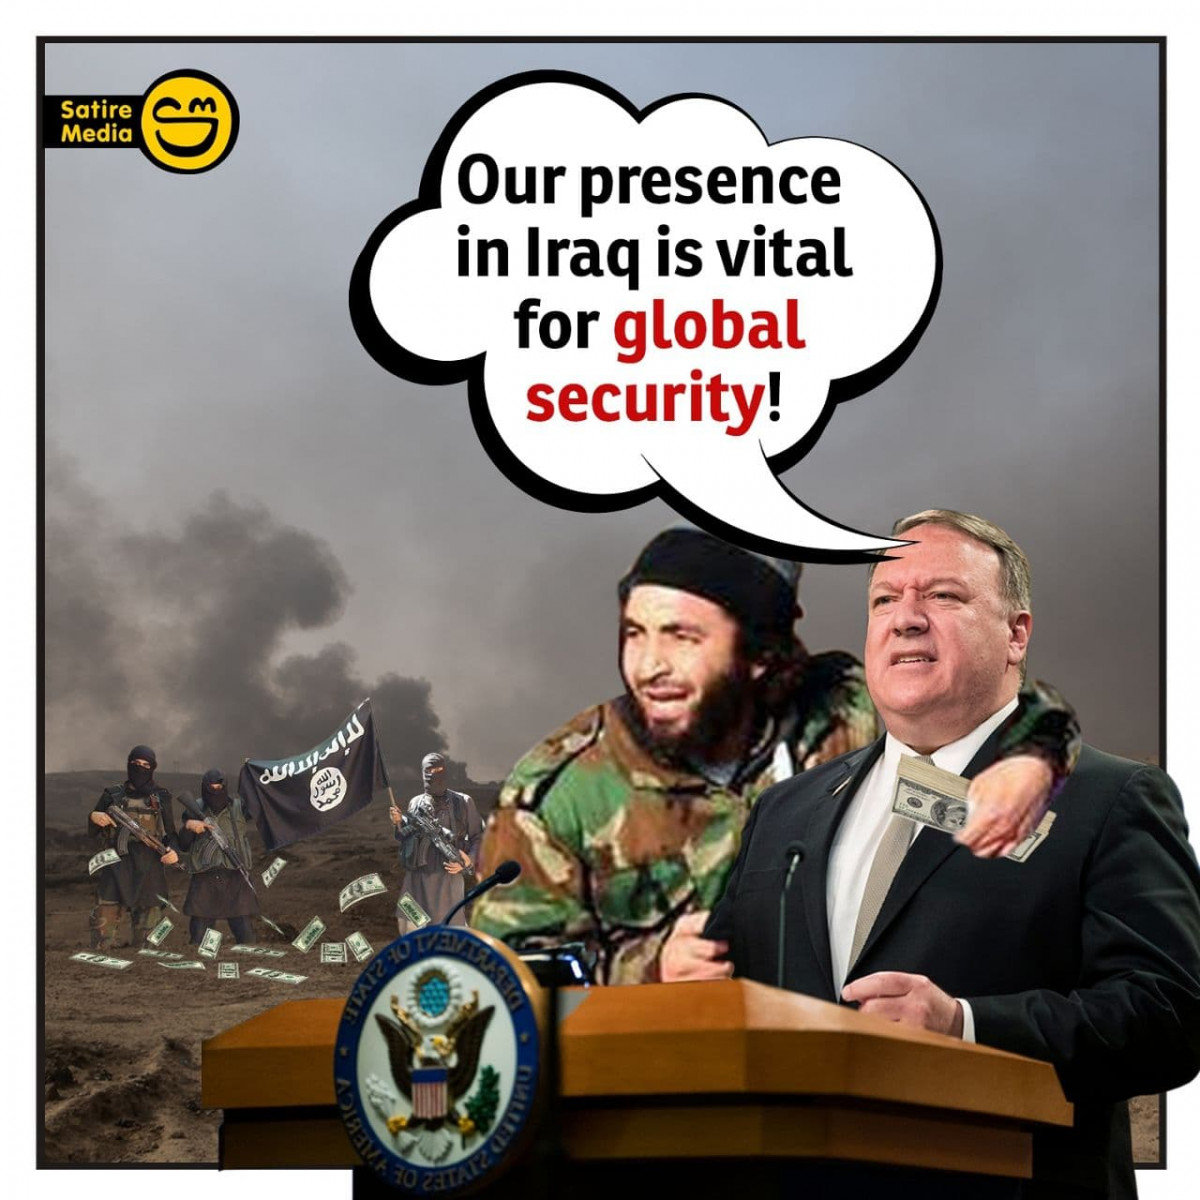 Our presence in Iraq is vital for global security